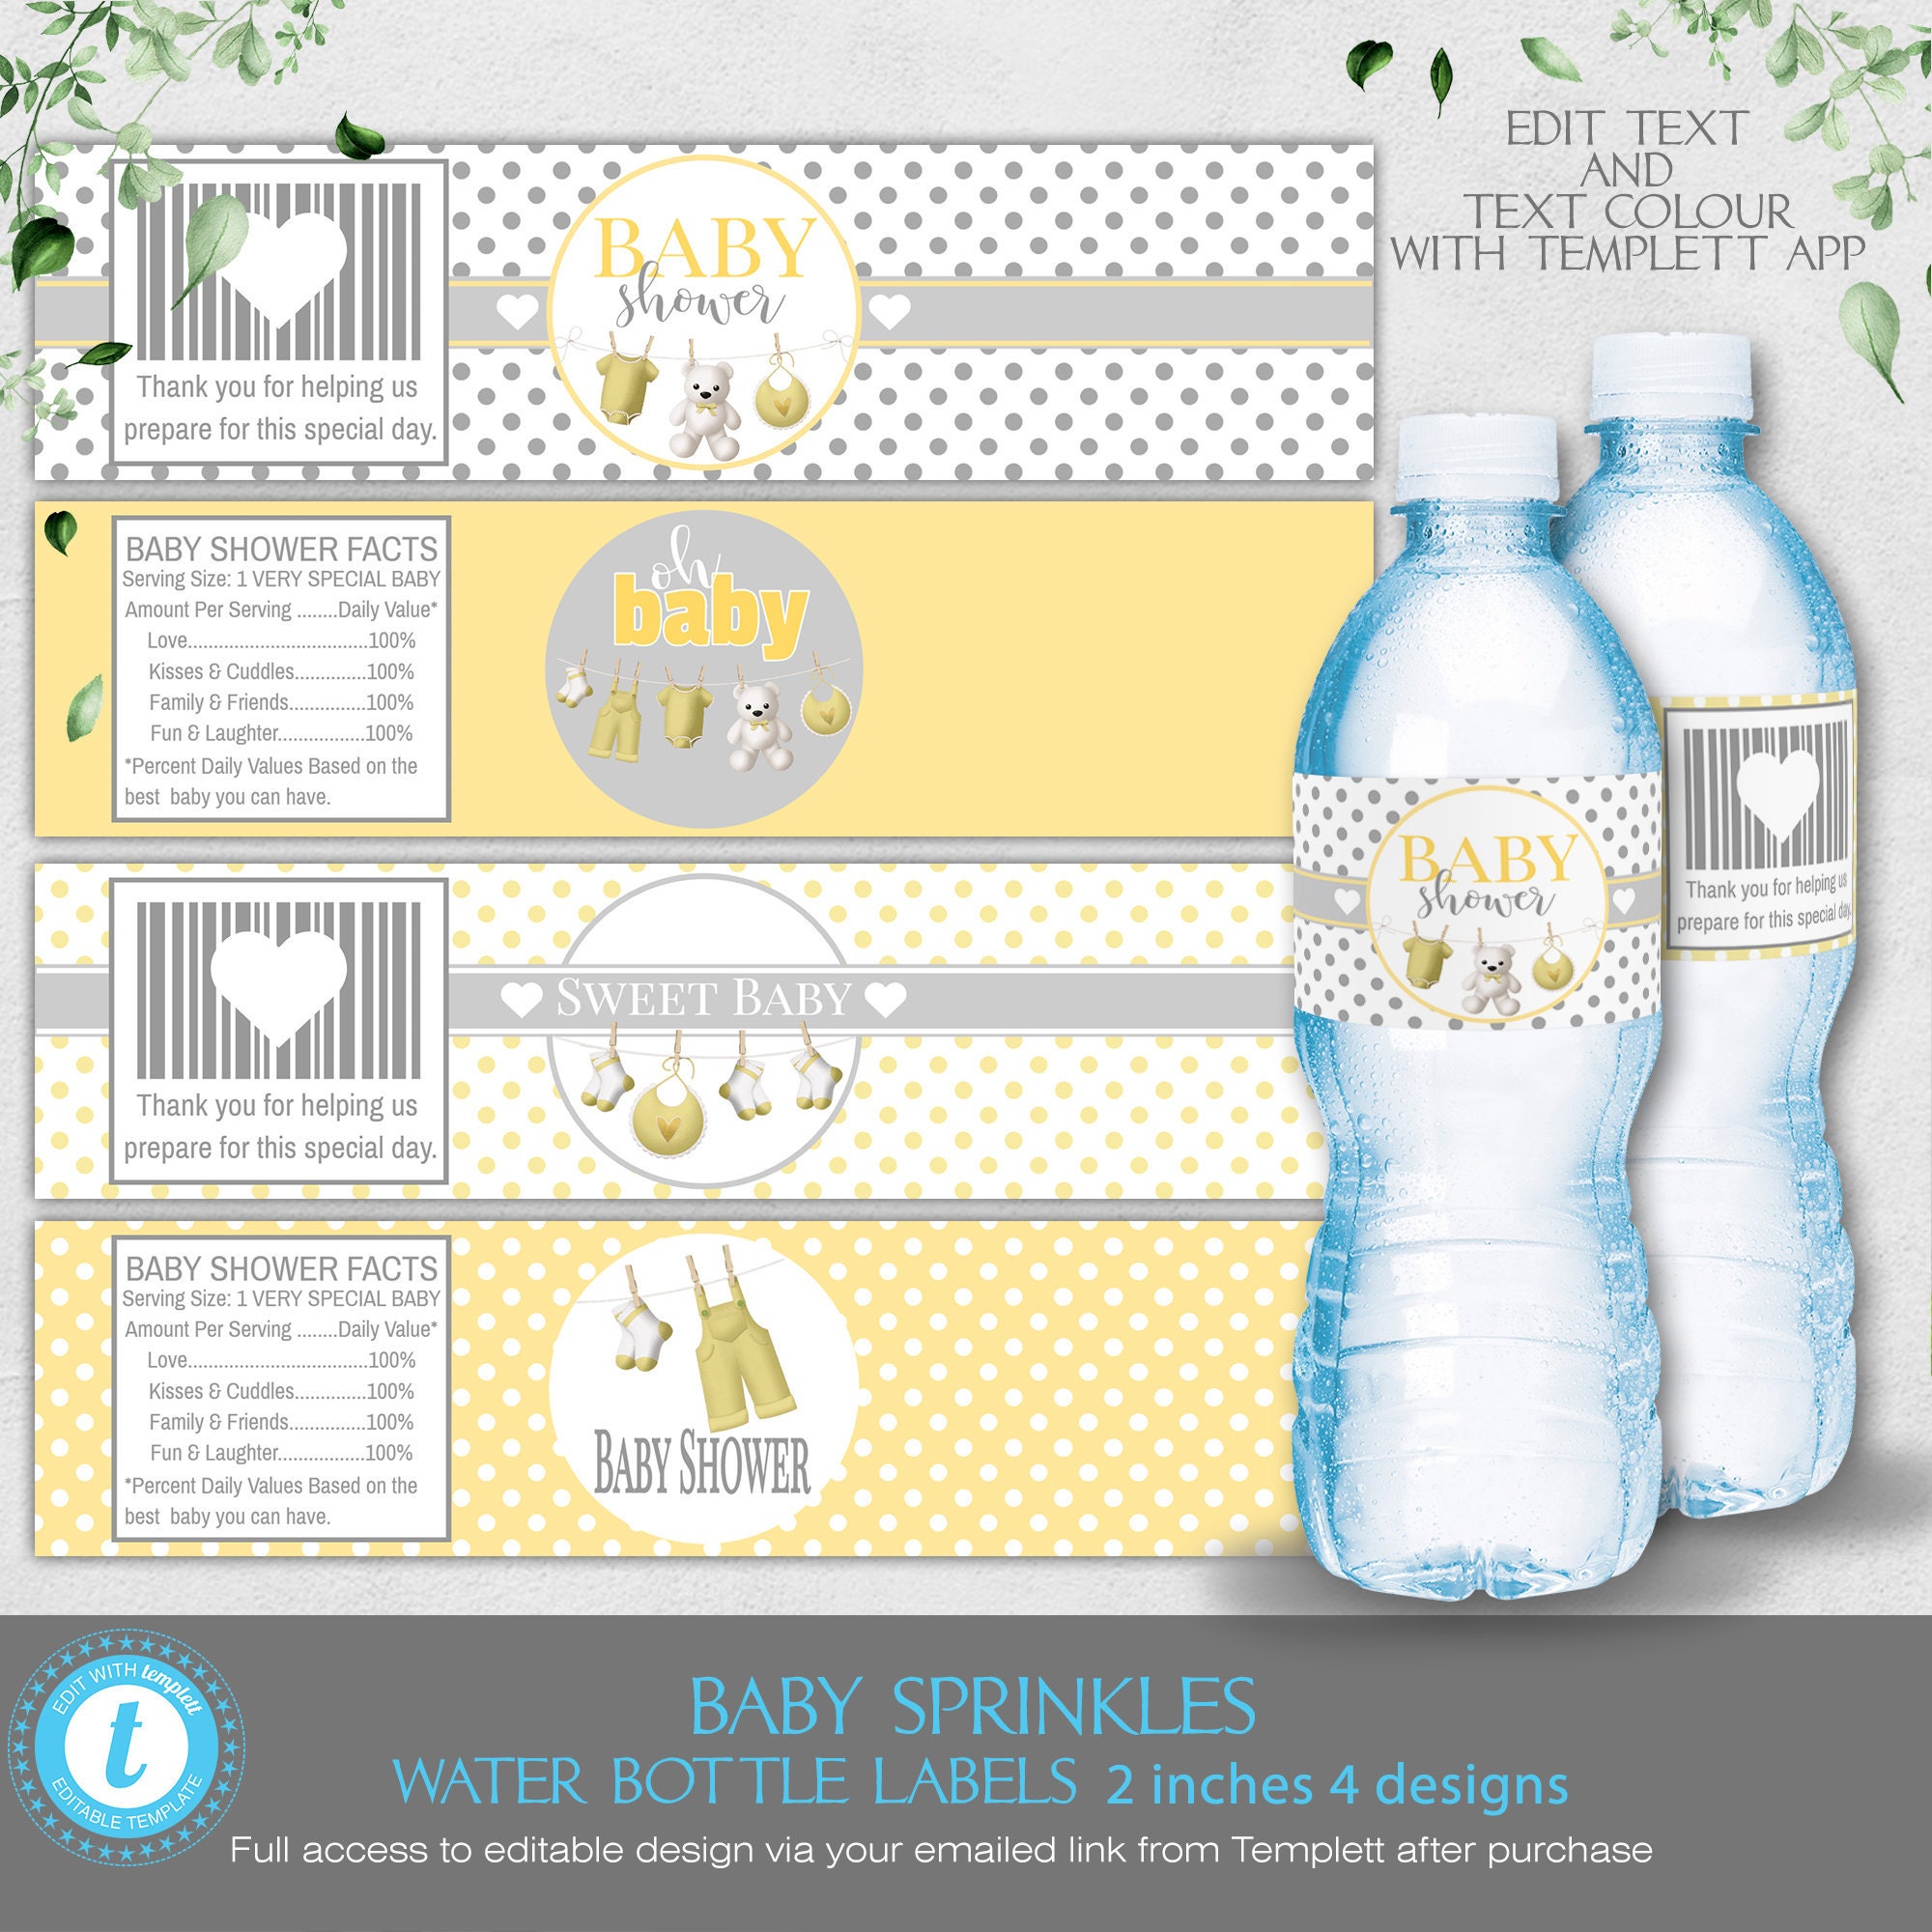 Baby Shower Water Bottle Labels - Water Bottle Label Template - Editable -  Gender Neutral - Shower Favors - Instant Download BS23 With Baby Shower Label Template For Favors